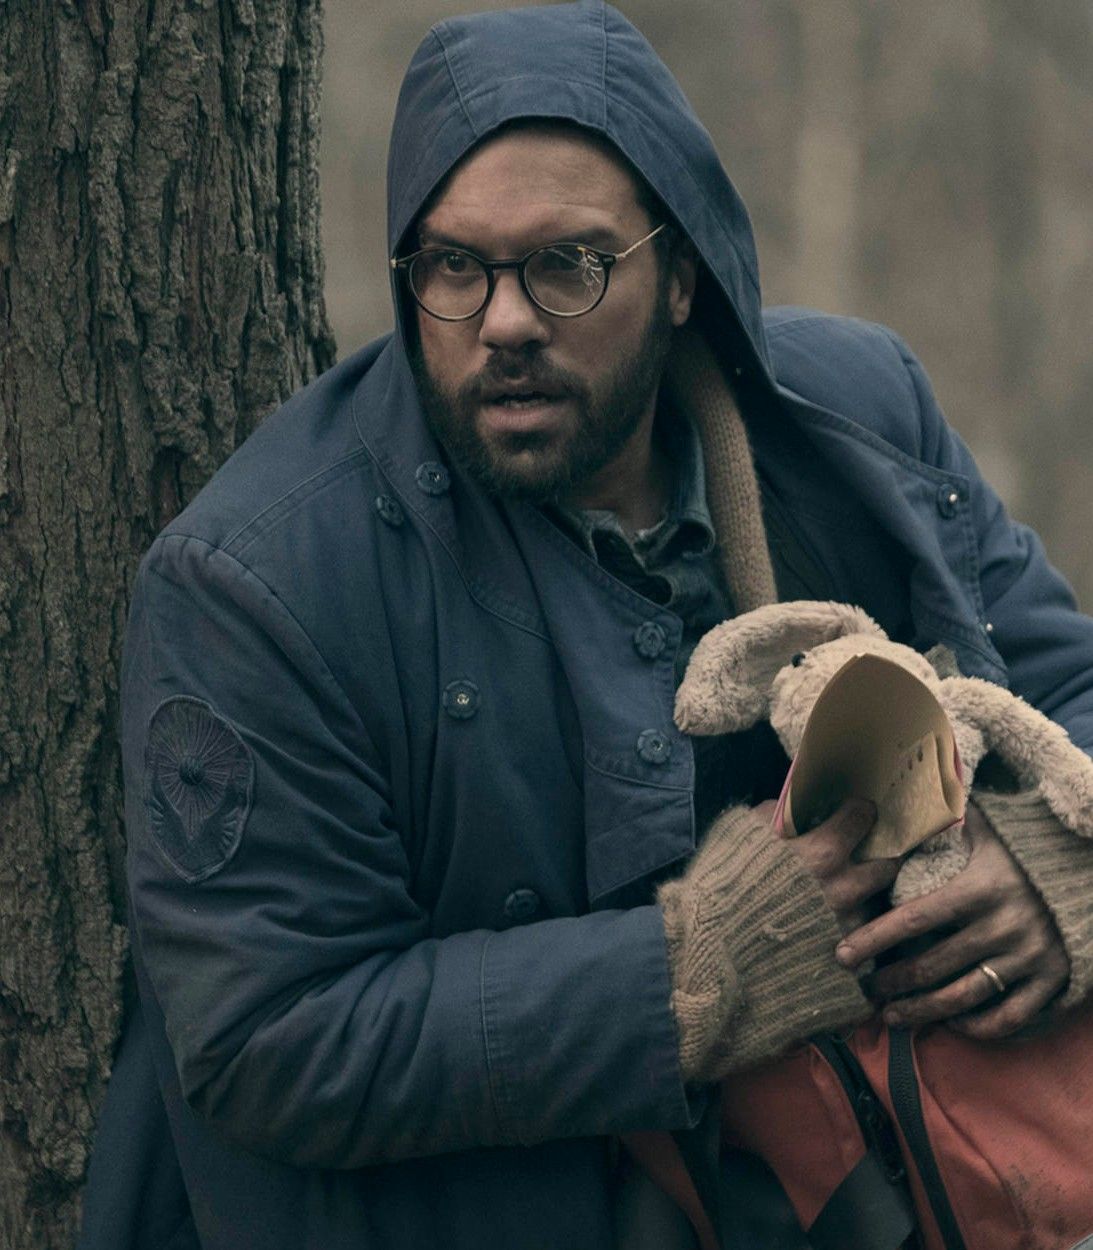 O-T Fagbenle in The Handmaids Tale TLDR